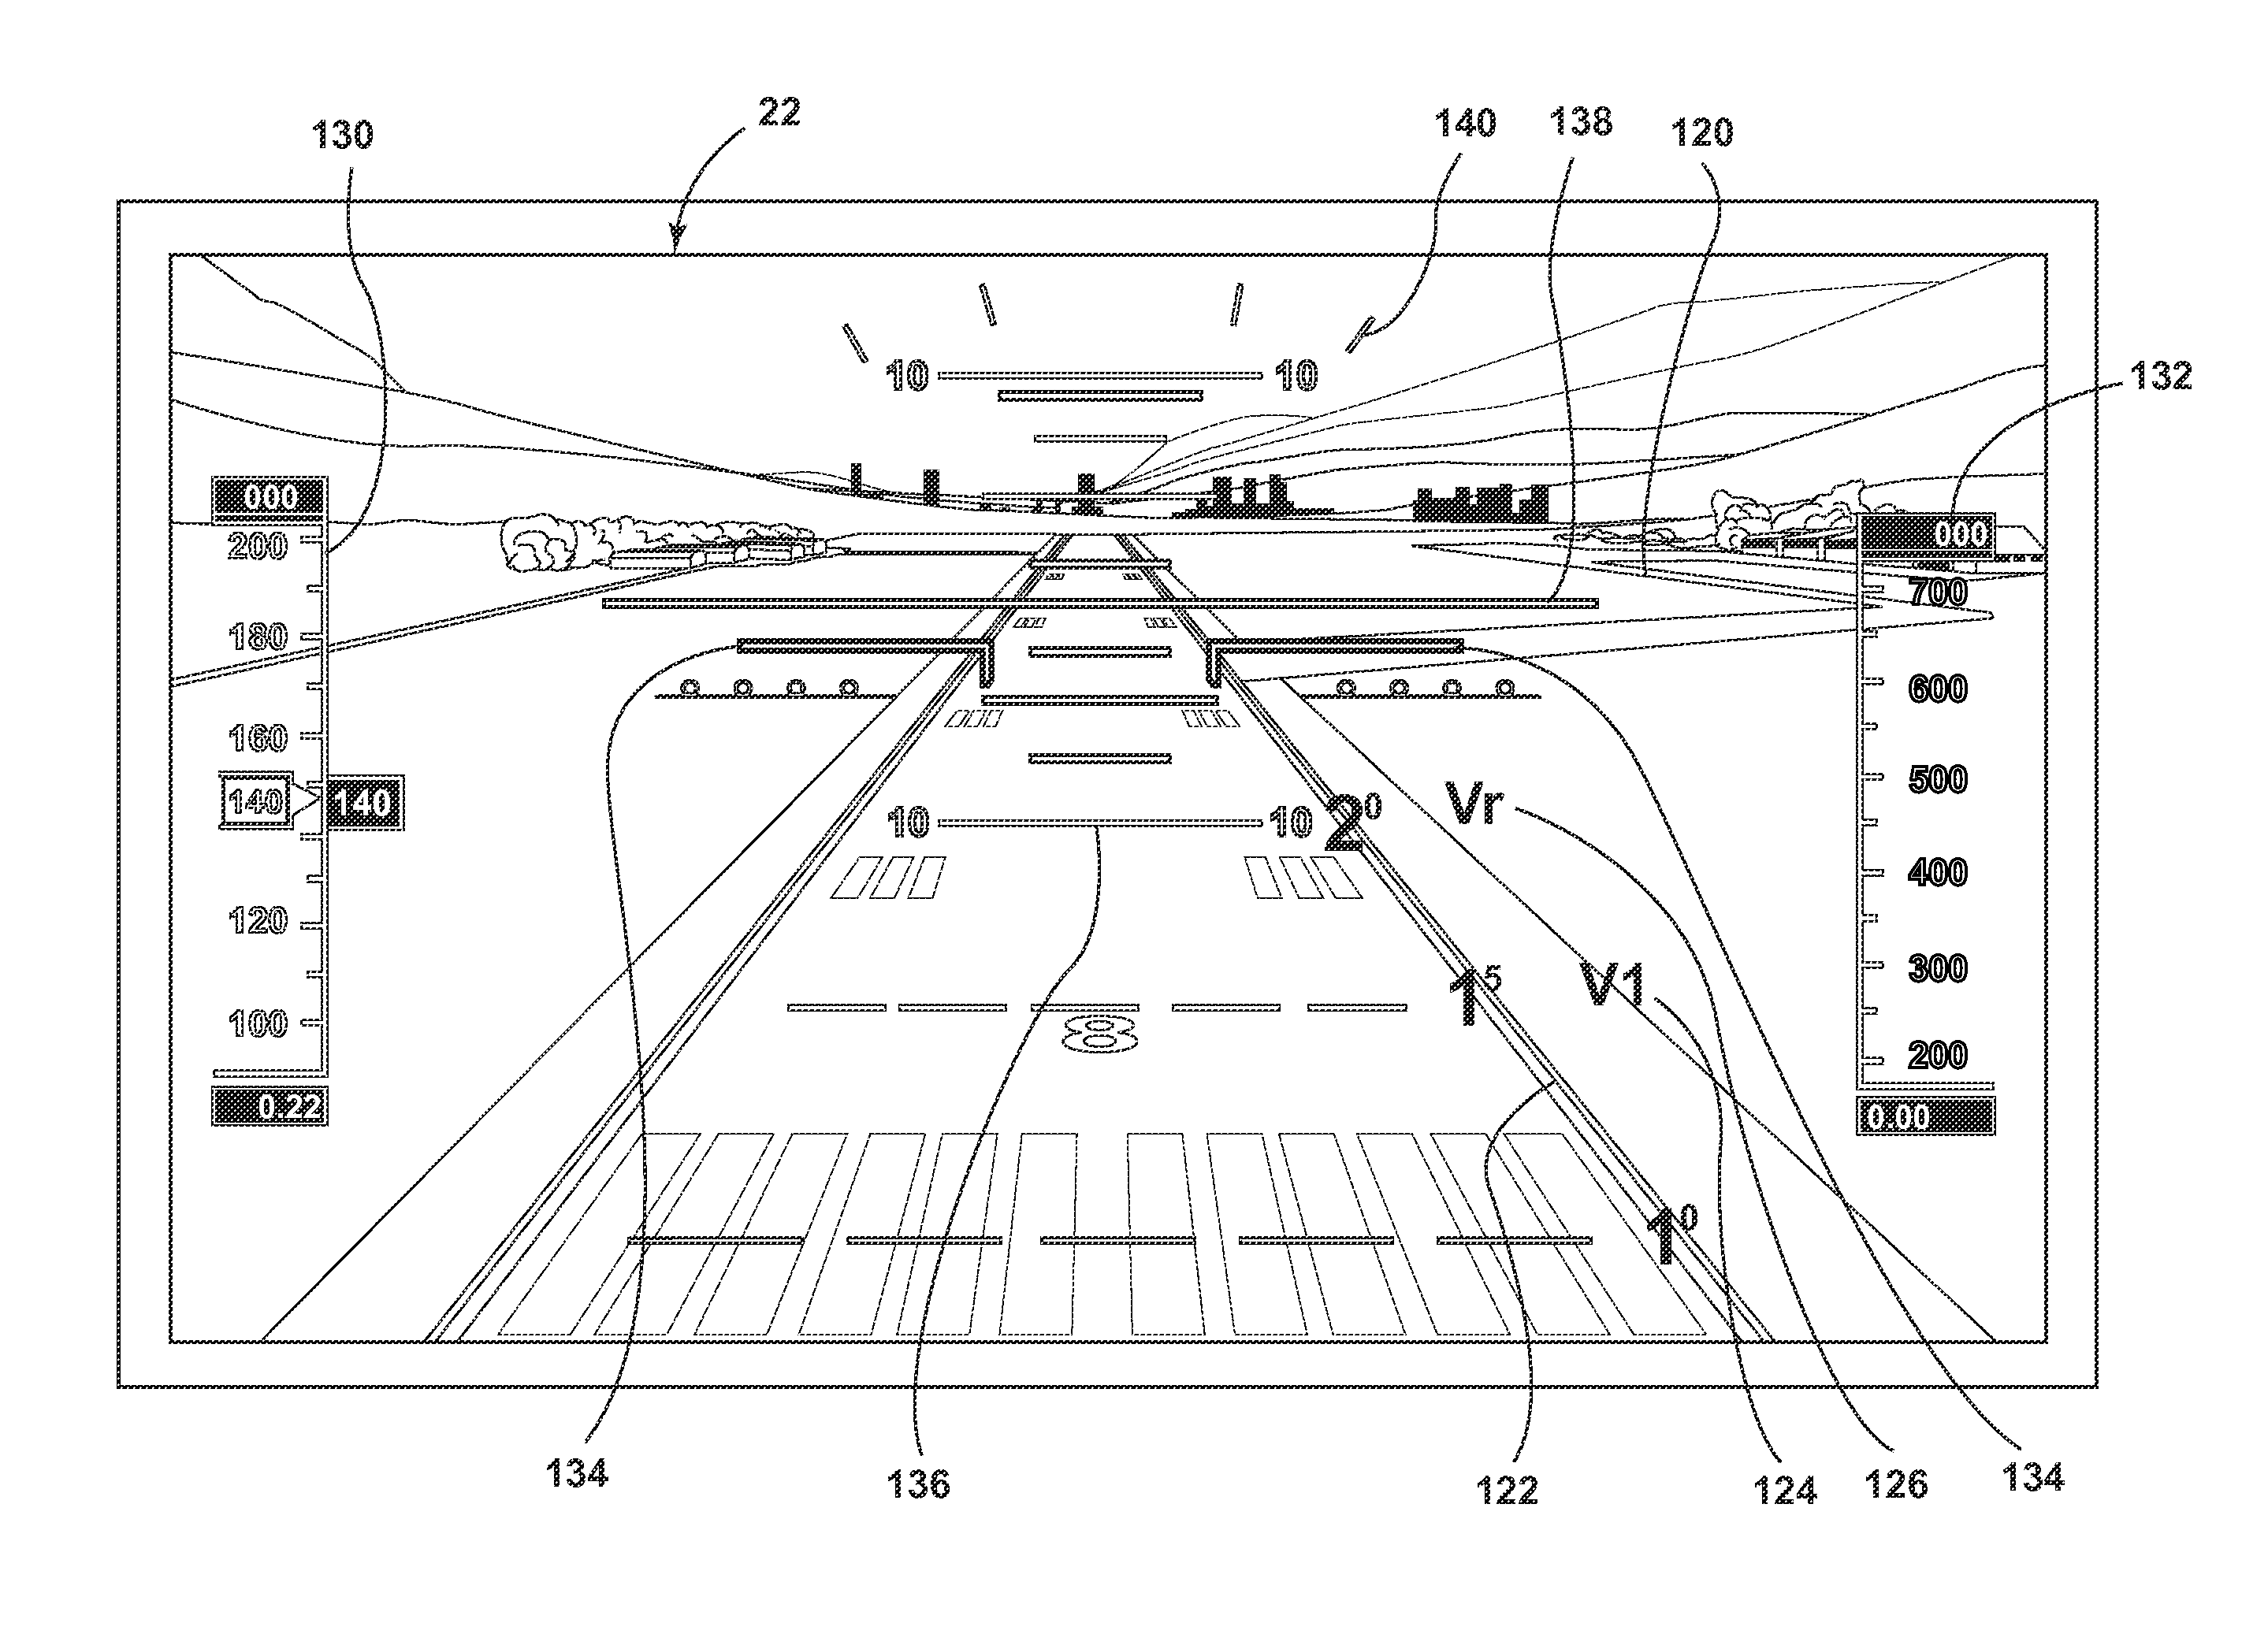 Methods for illustrating aircraft situational information